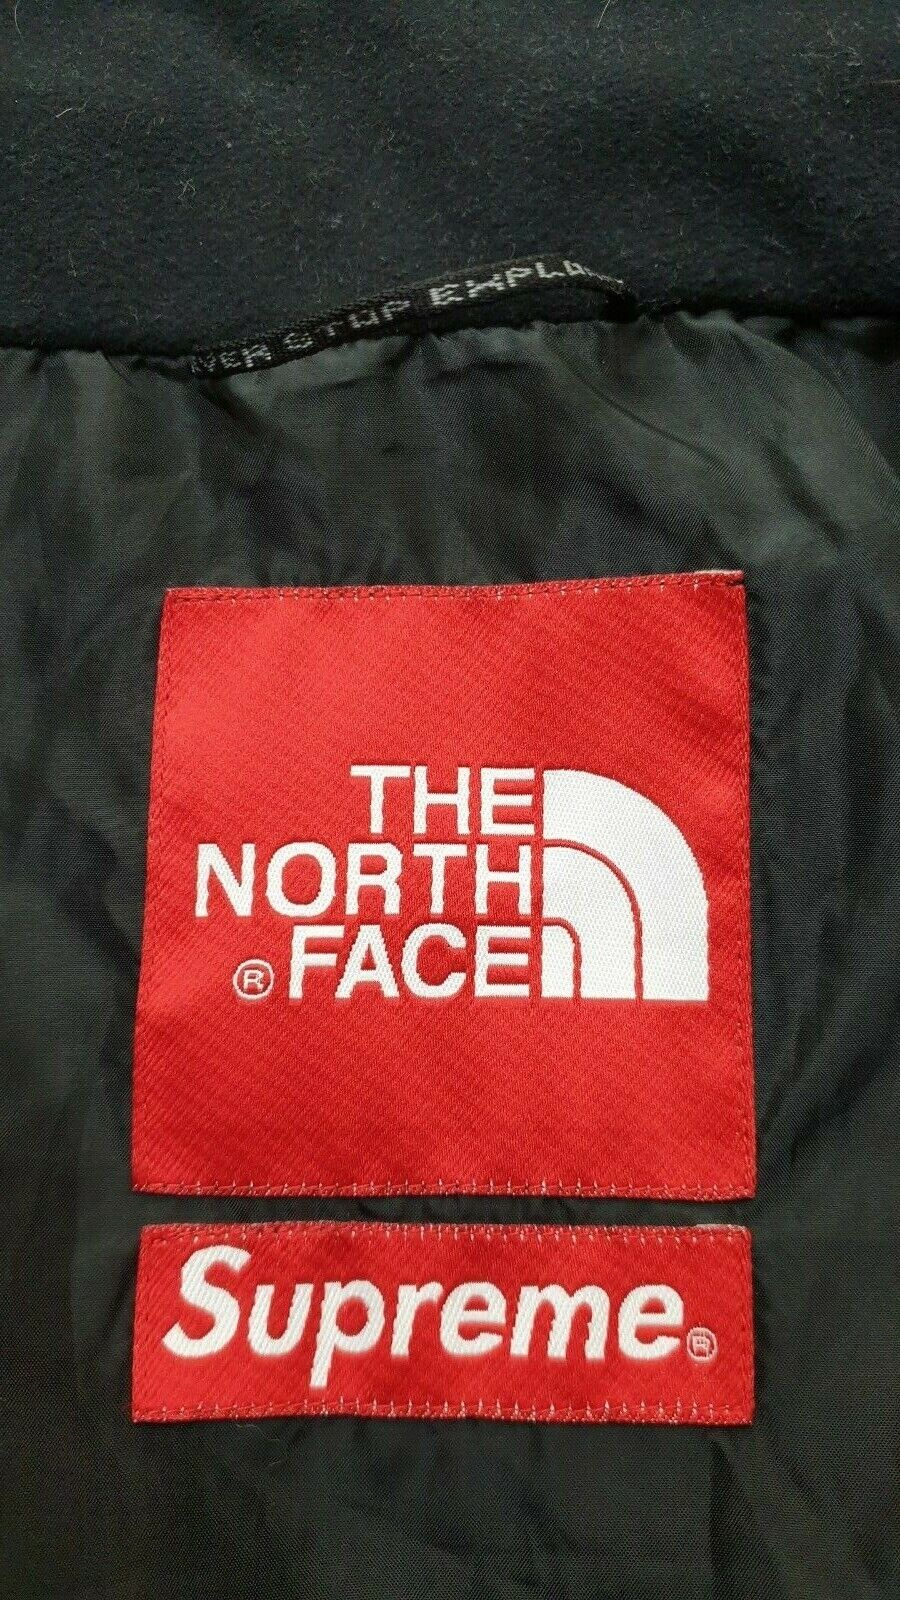 SUPREME x THE NORTH FACE 2008 Summit NIGHT Size: Small EXCELLENT Condition  | eBay